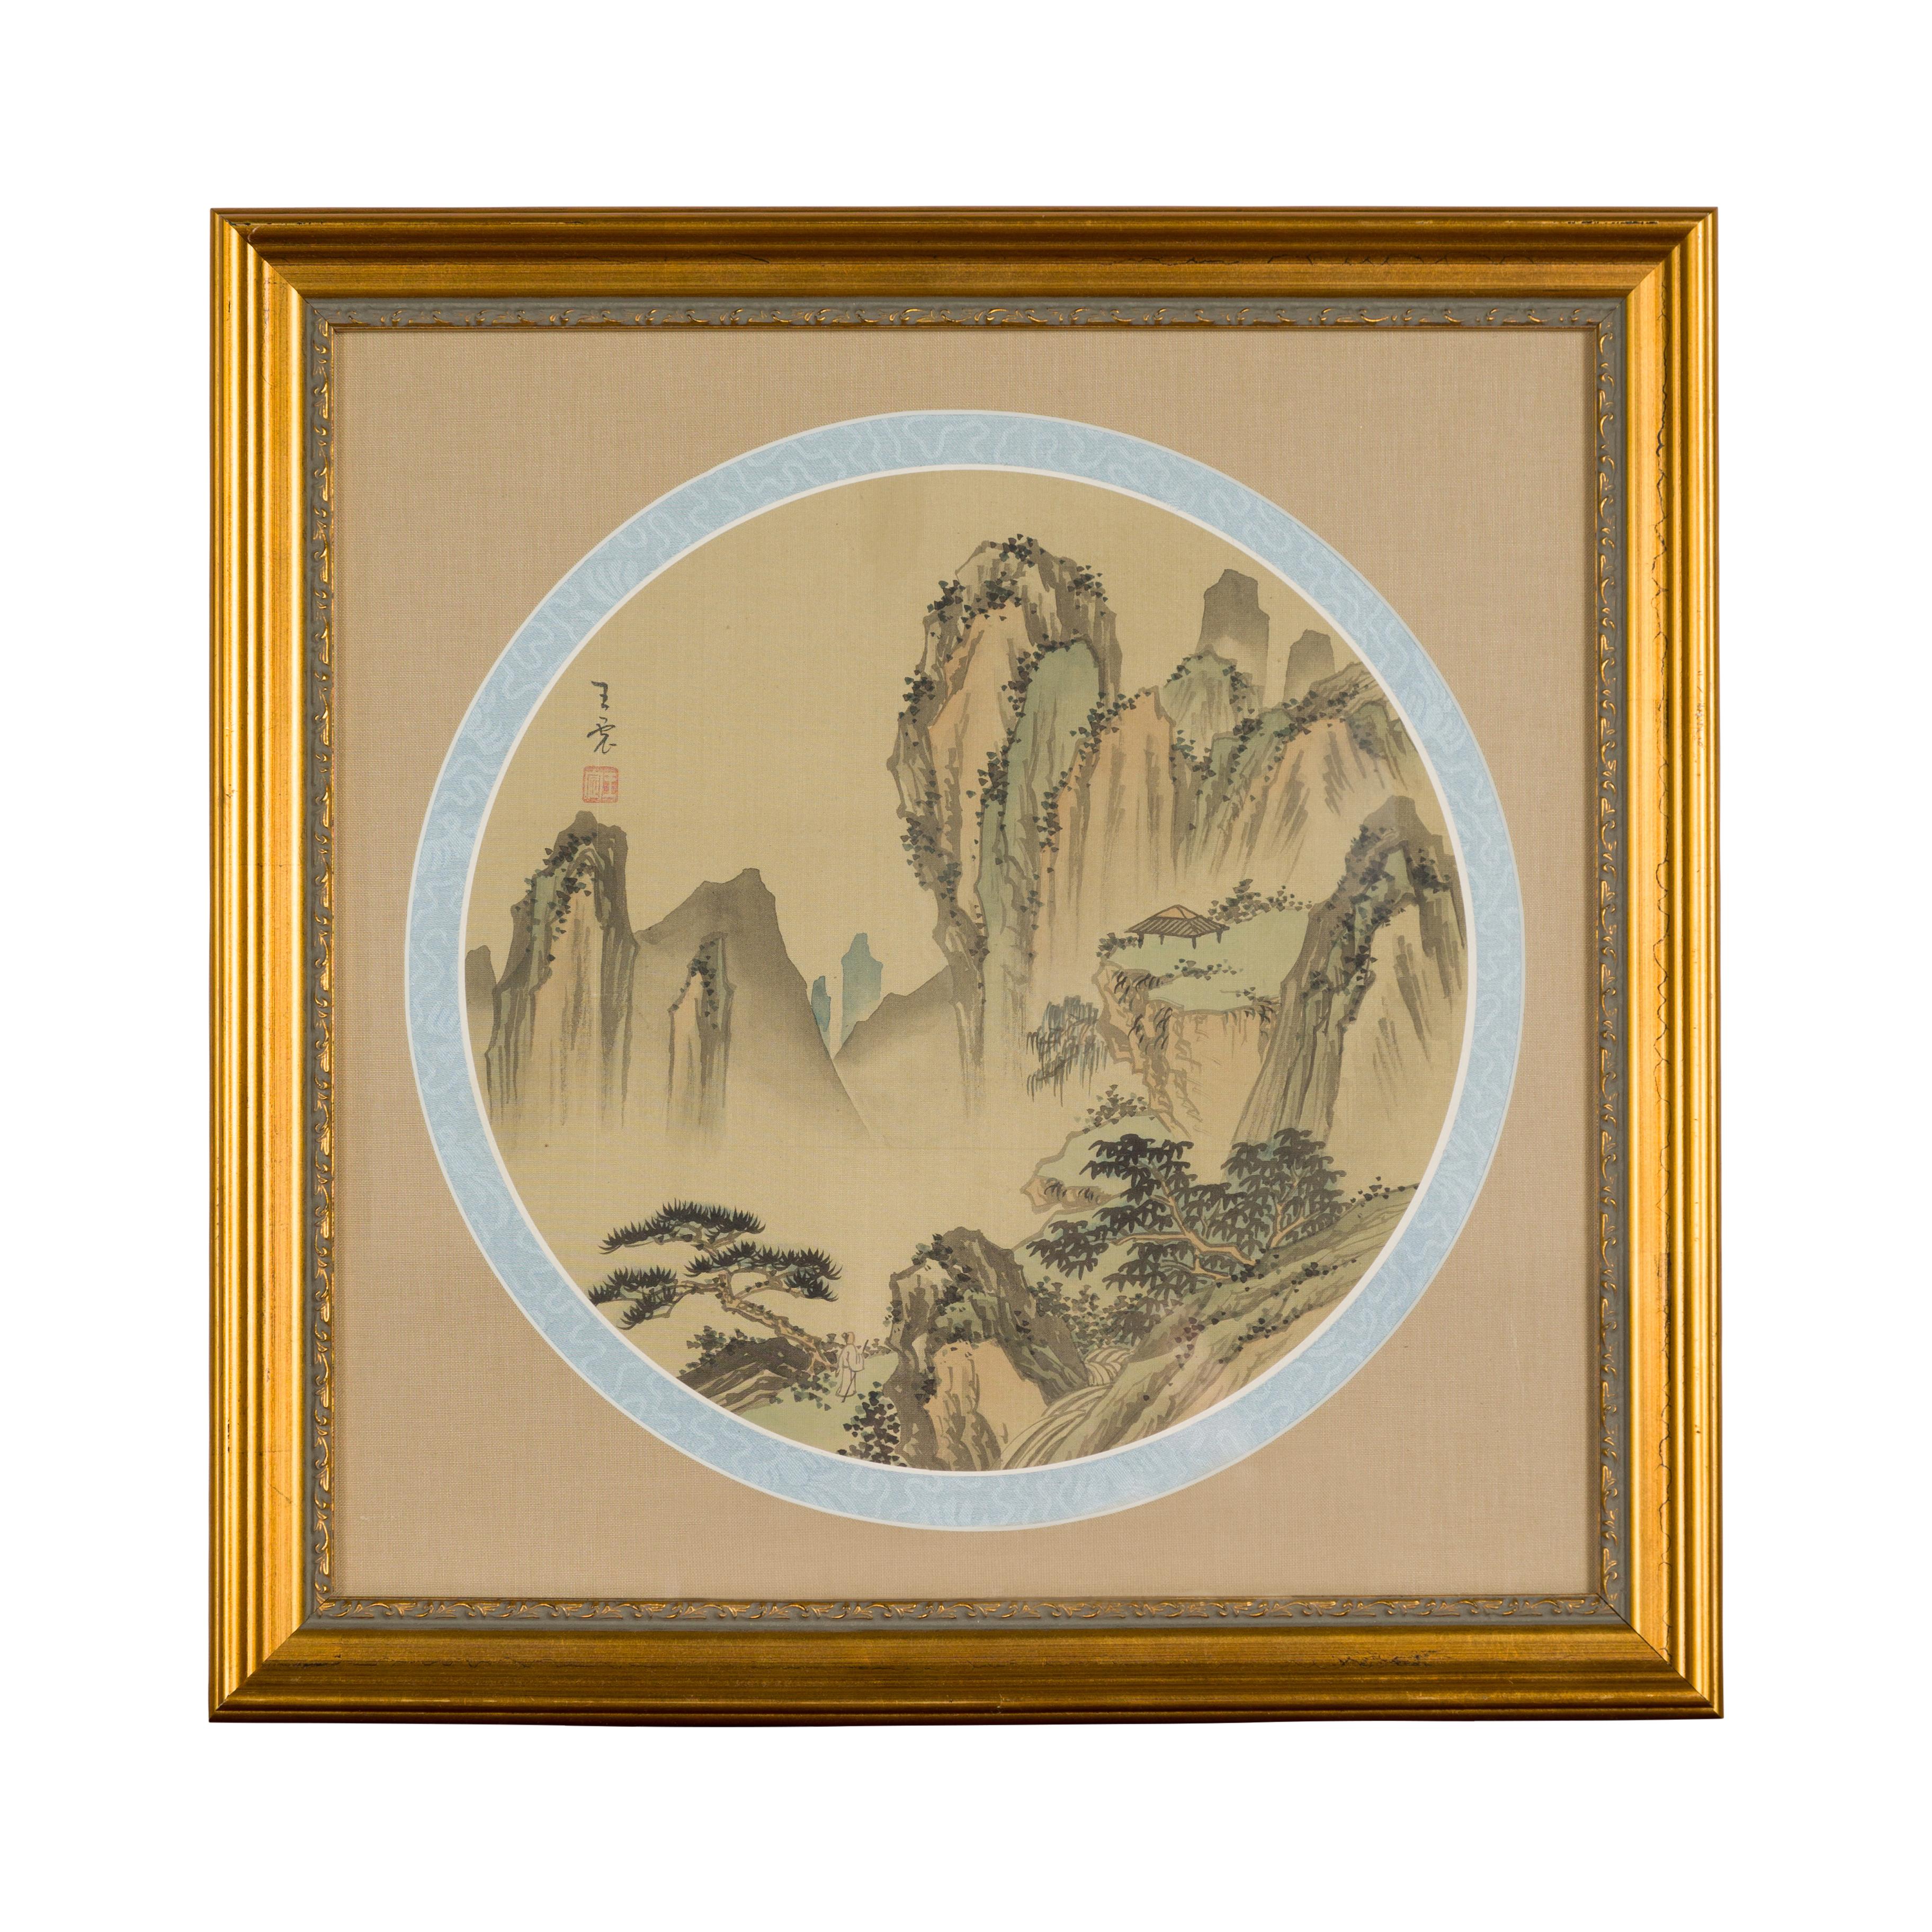 A Japanese landscape painting on silk from the 19th century in new gilded frame, signed. Immerse yourself in the serene beauty of this Japanese landscape painting on silk, created during the 19th century. Presented in a new gilded frame, this